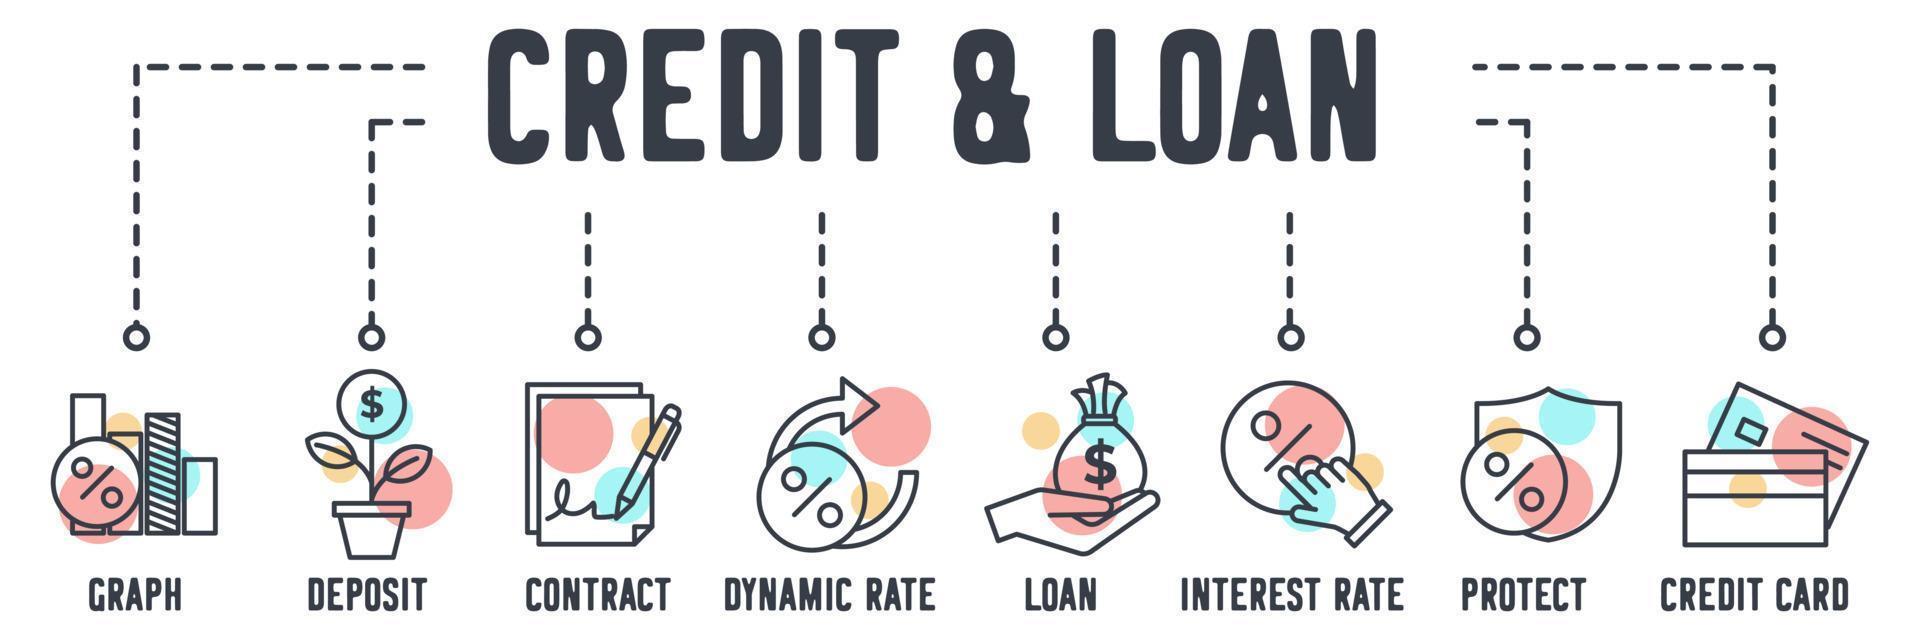 Credit and Loan banner web icon. mortgage graph, deposit, sign contract, dynamic rate, interest rate, loan, protect rate, credit card vector illustration concept.